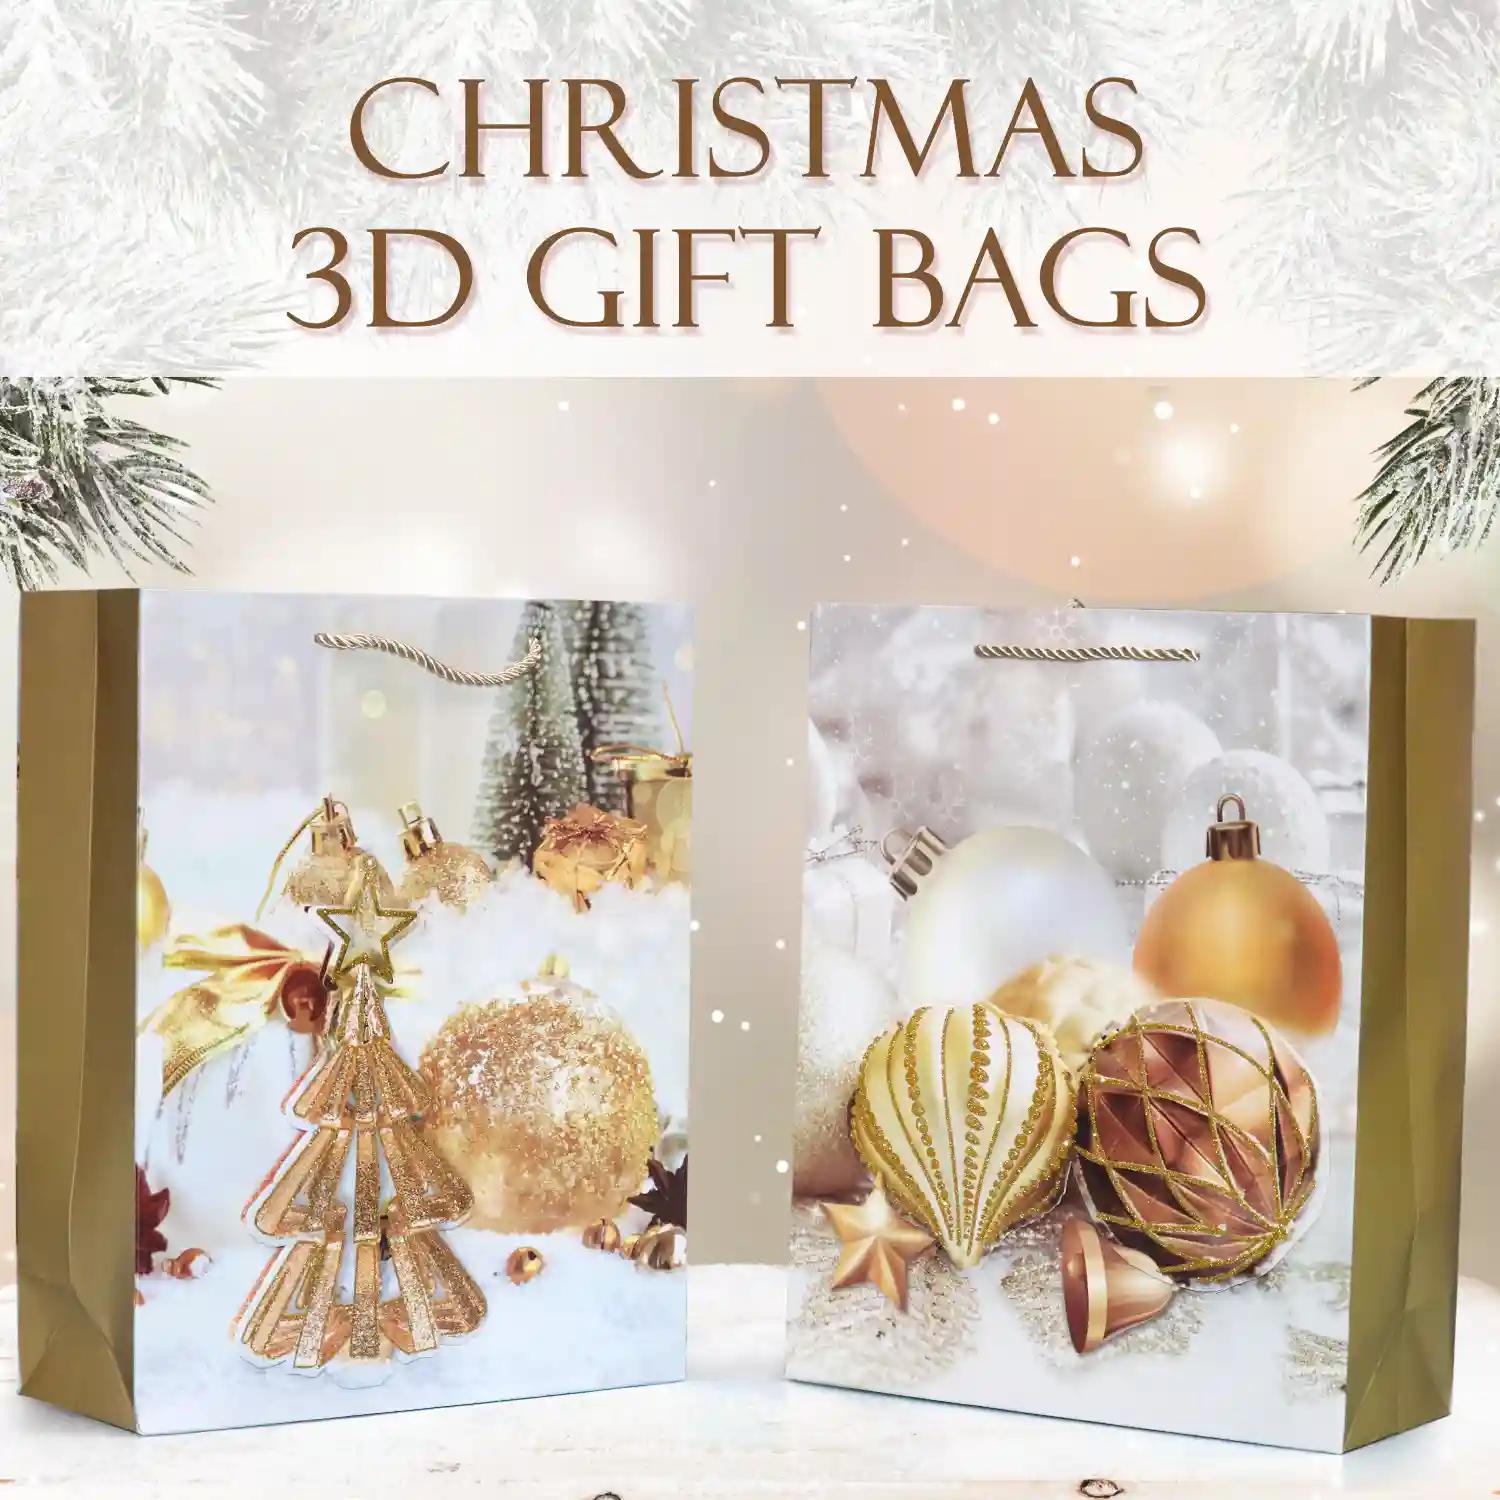 3D Multi Various Designing Merry Christmas Theme Printed Gift Wrapping Bag Awesome Exclusive Look Tote Bag For Snack Clothing Present Box Packaging Xmas Gifts Party Bag (Set Of 4)